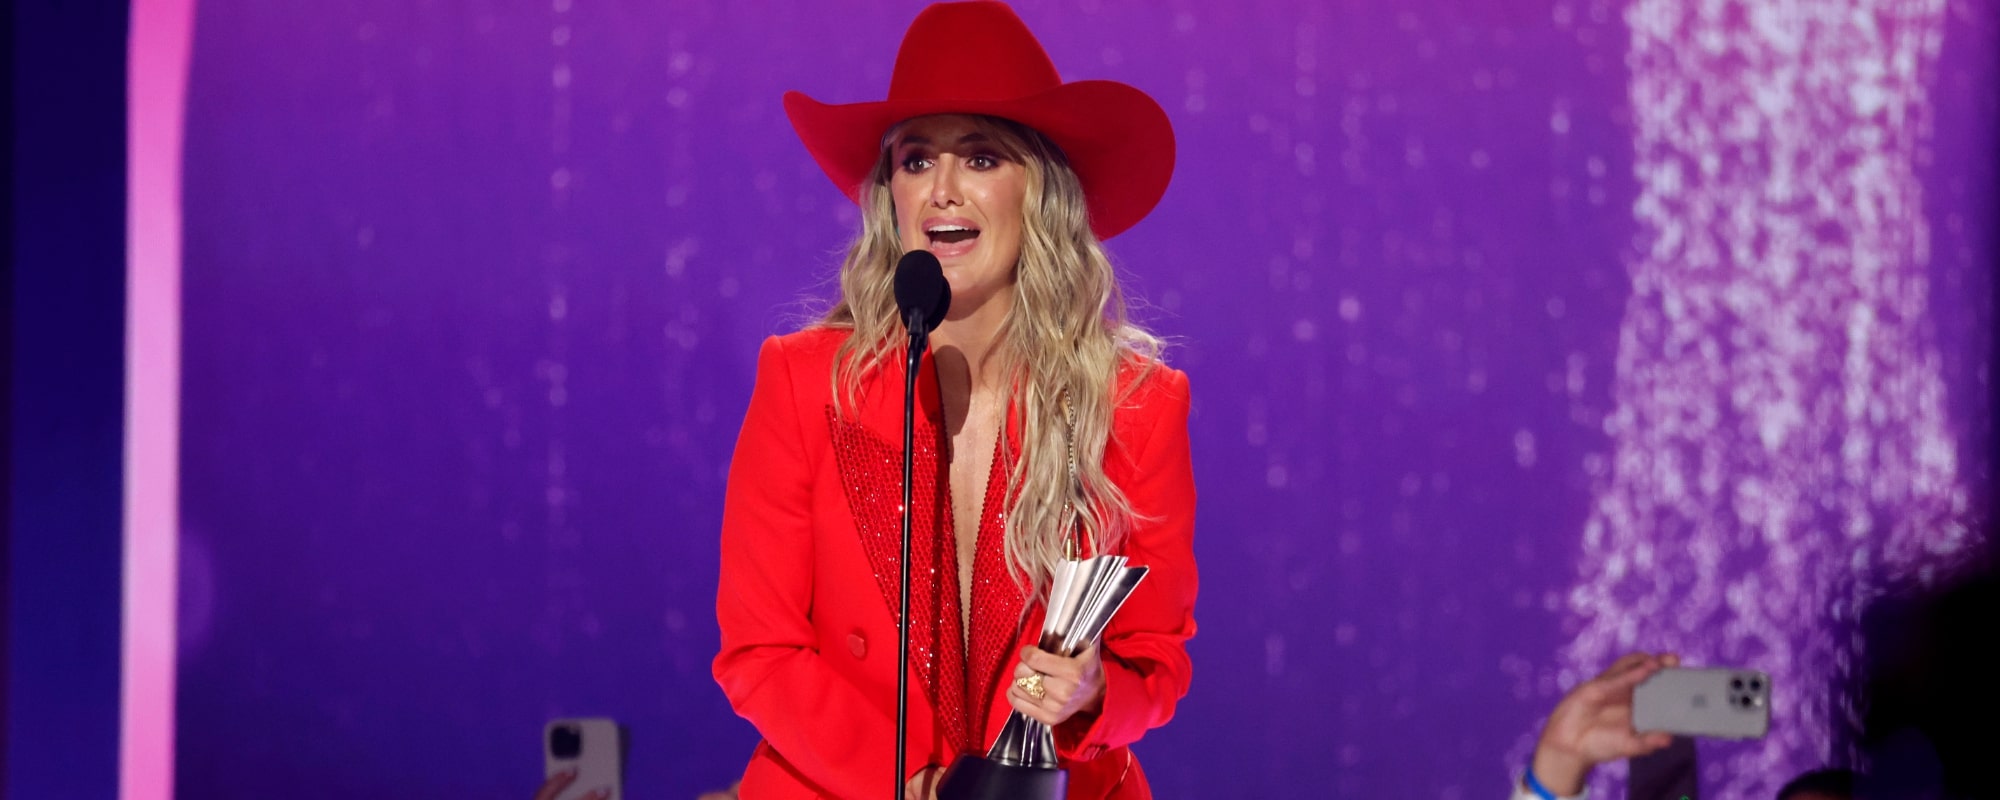 Lainey Wilson Continues Her Whirlwind Winning Streak, Takes Home ACM Entertainer of the Year